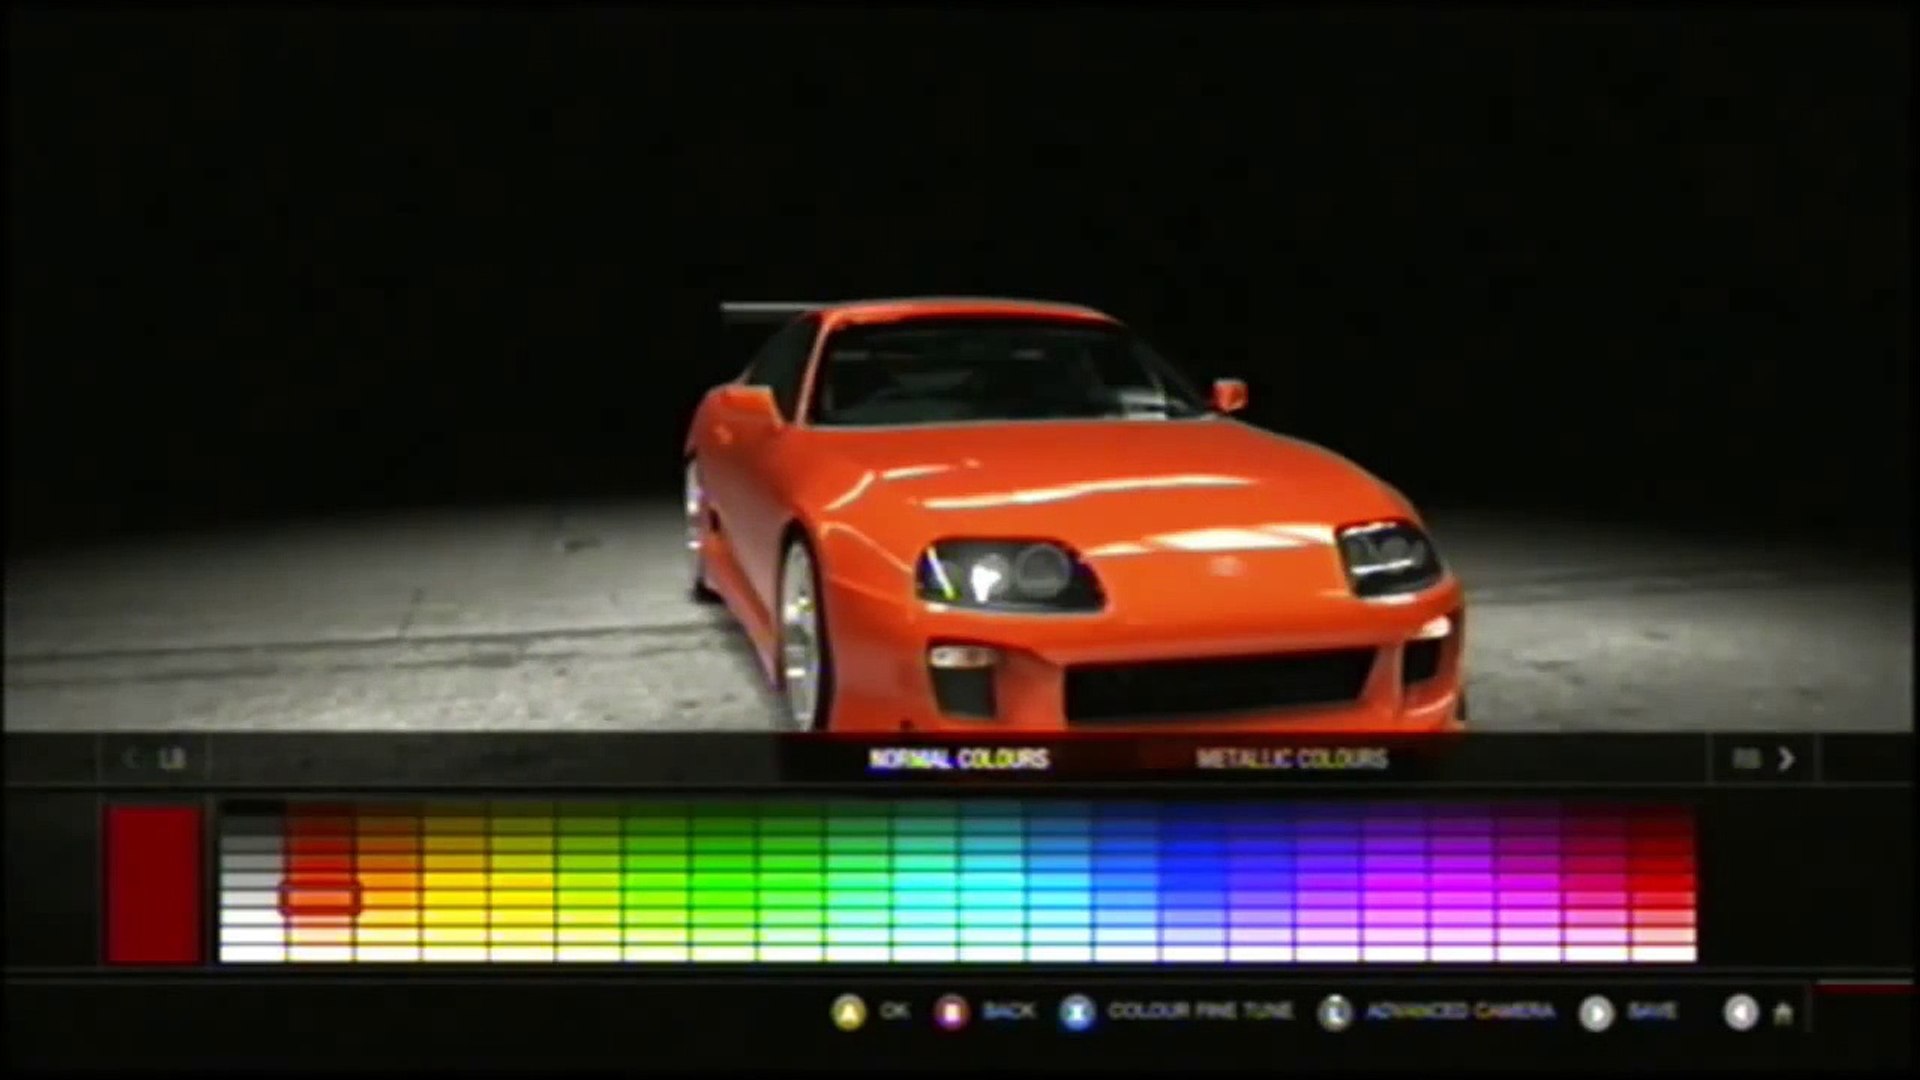 HOW TO MAKE THE FAST & FURIOUS SUPRA IN FORZA 4 - video Dailymotion